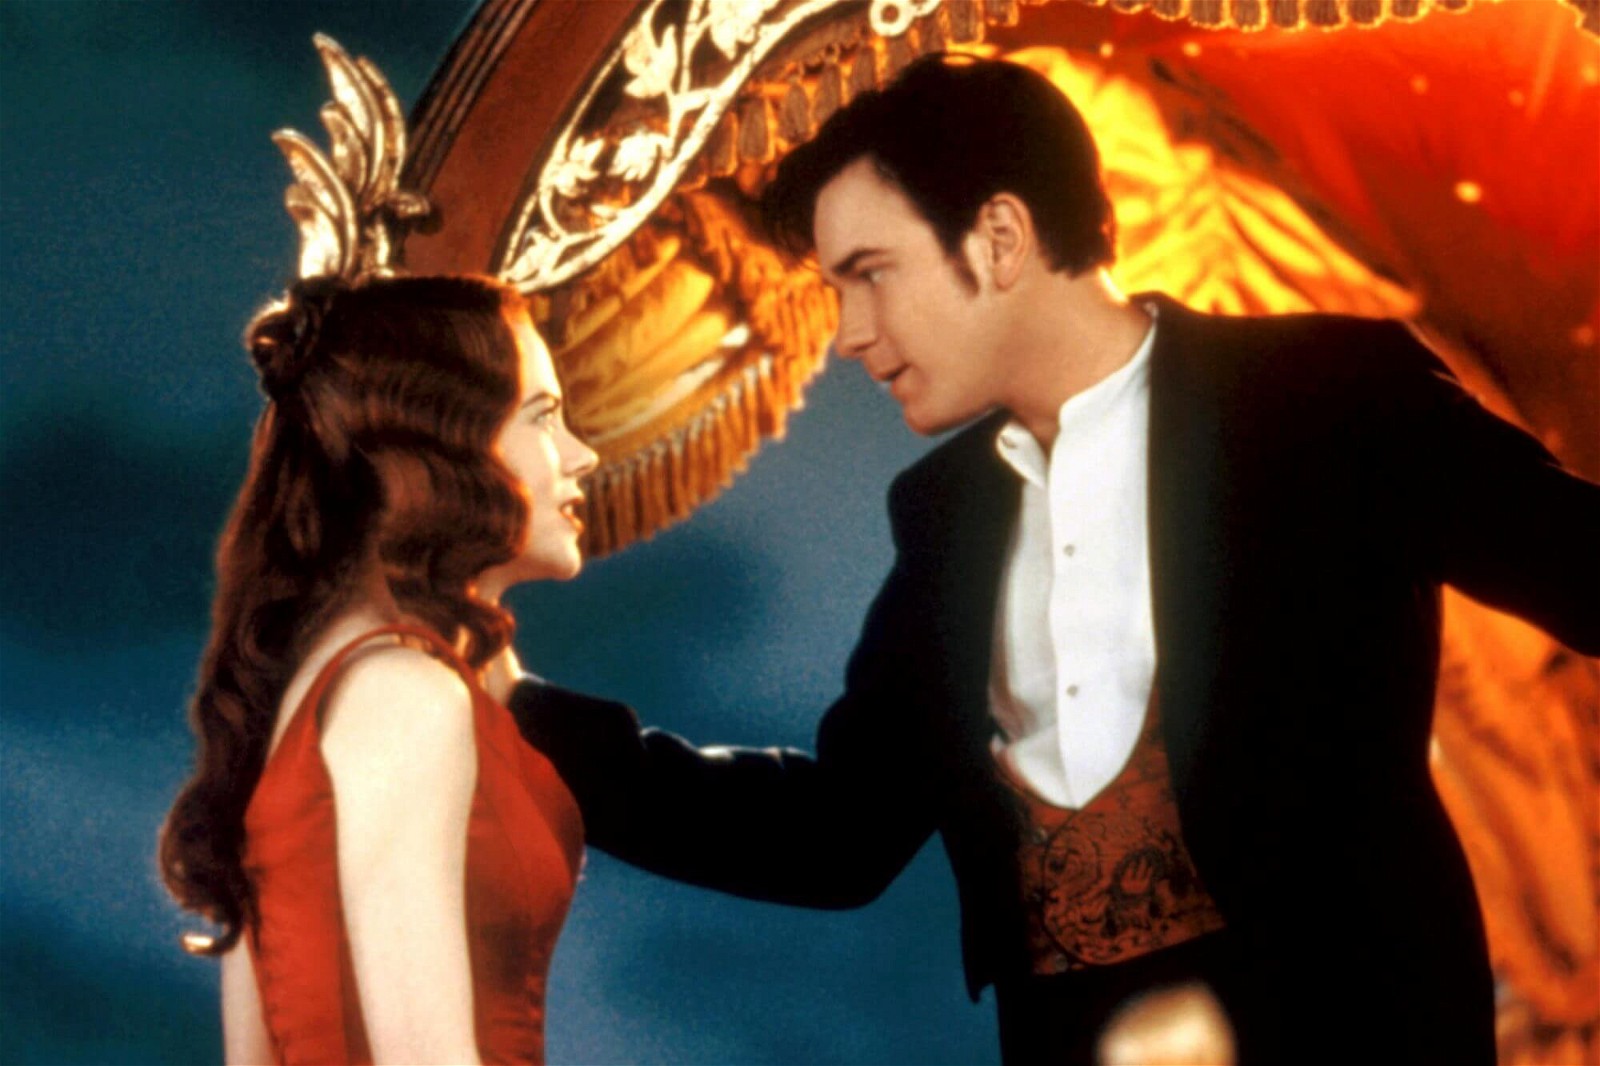 Nicole Kidman and Ewan McGregor in a still from the movie